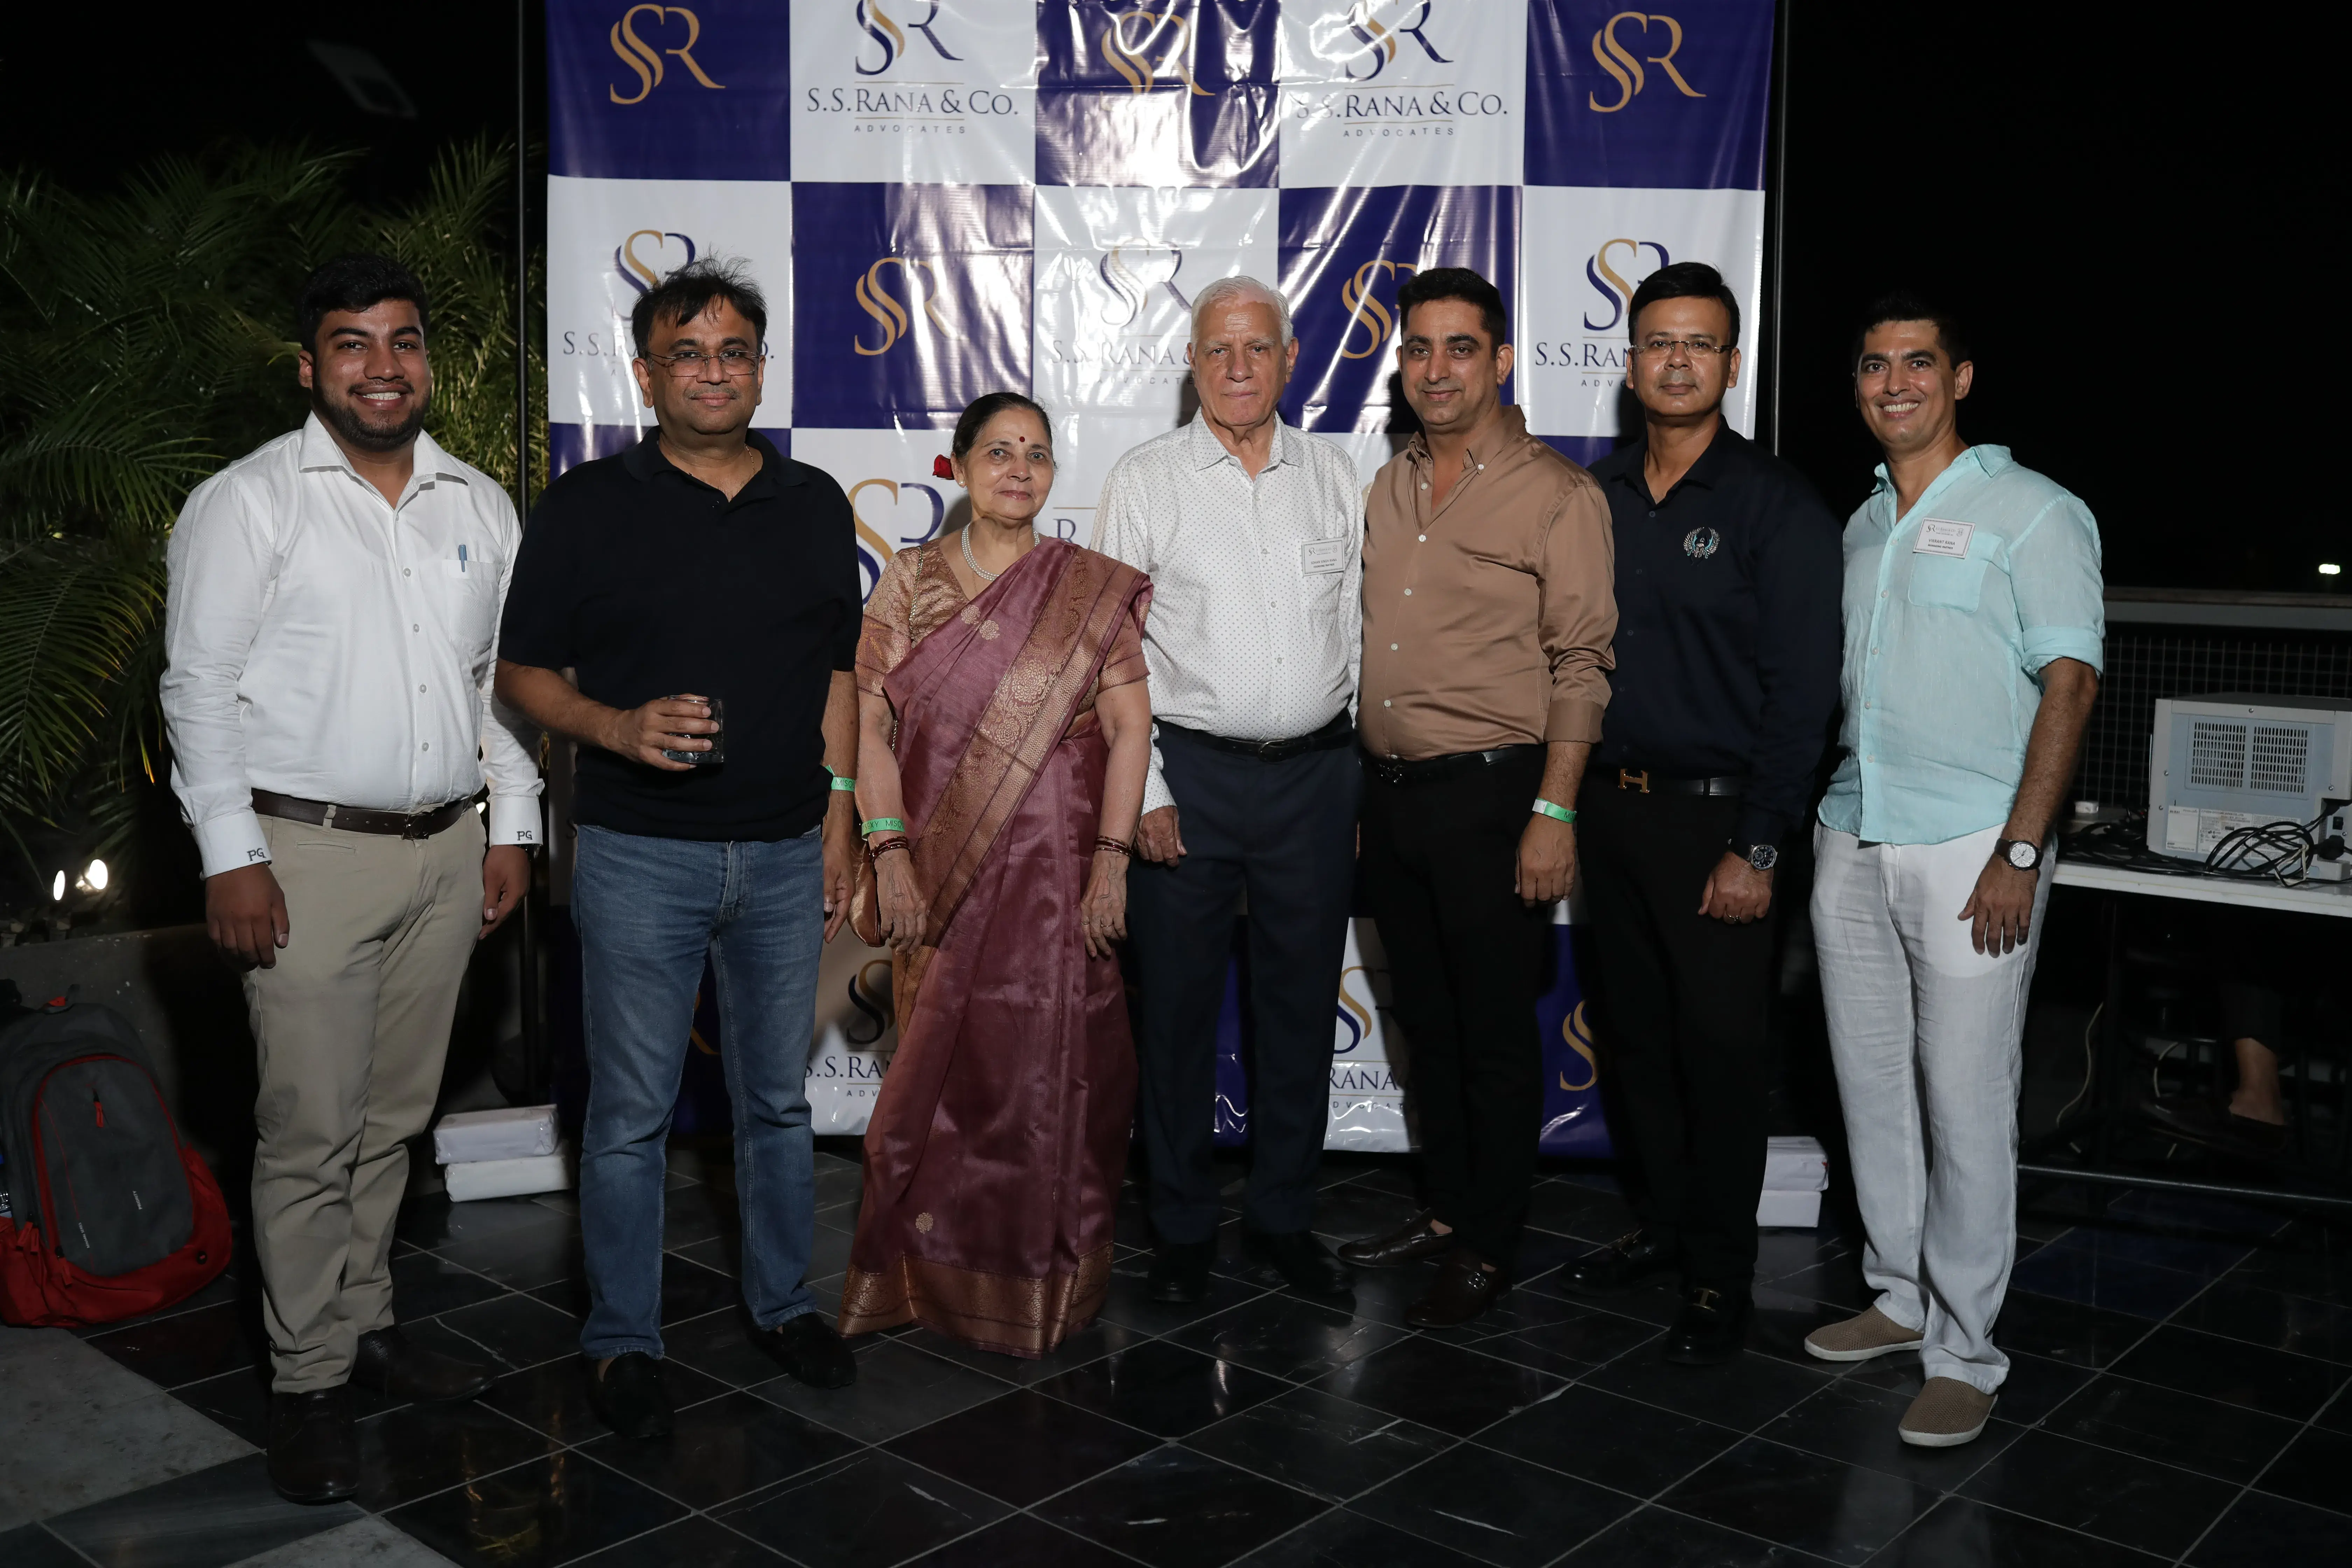 S.S. Rana & Co. with the Client